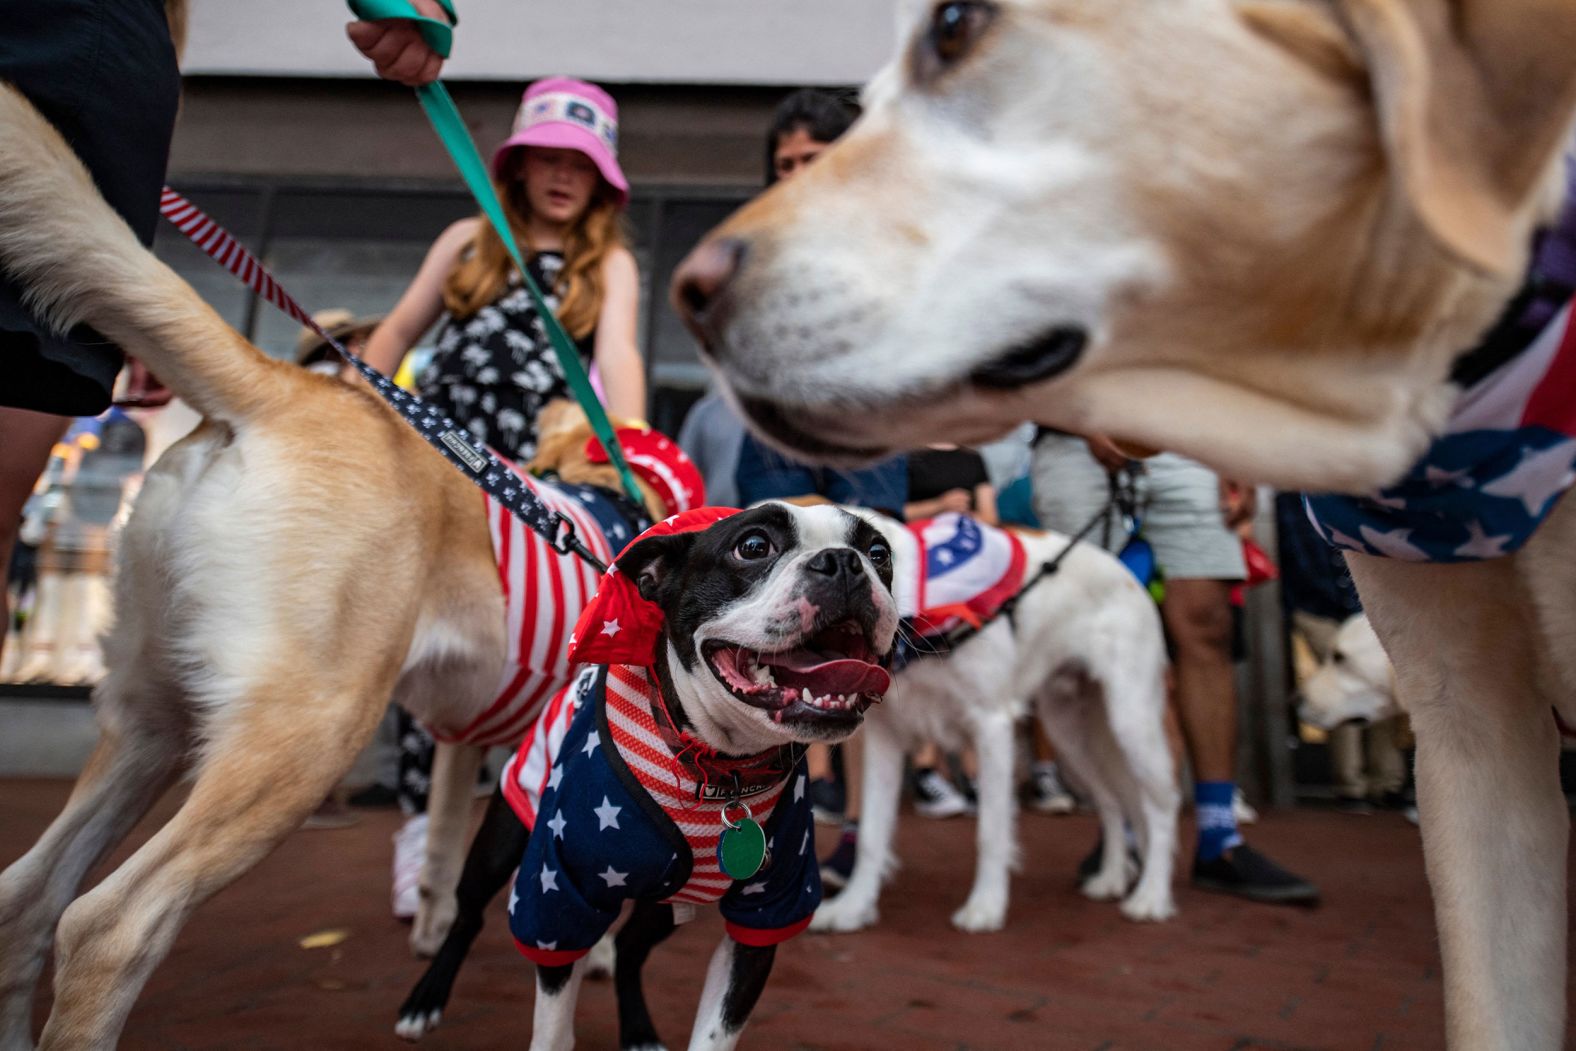 Dogs dressed in patriotic costumes sniff each other as they wait for their turn to walk in the Patriotic Pooch Parade in Boston on Sunday.